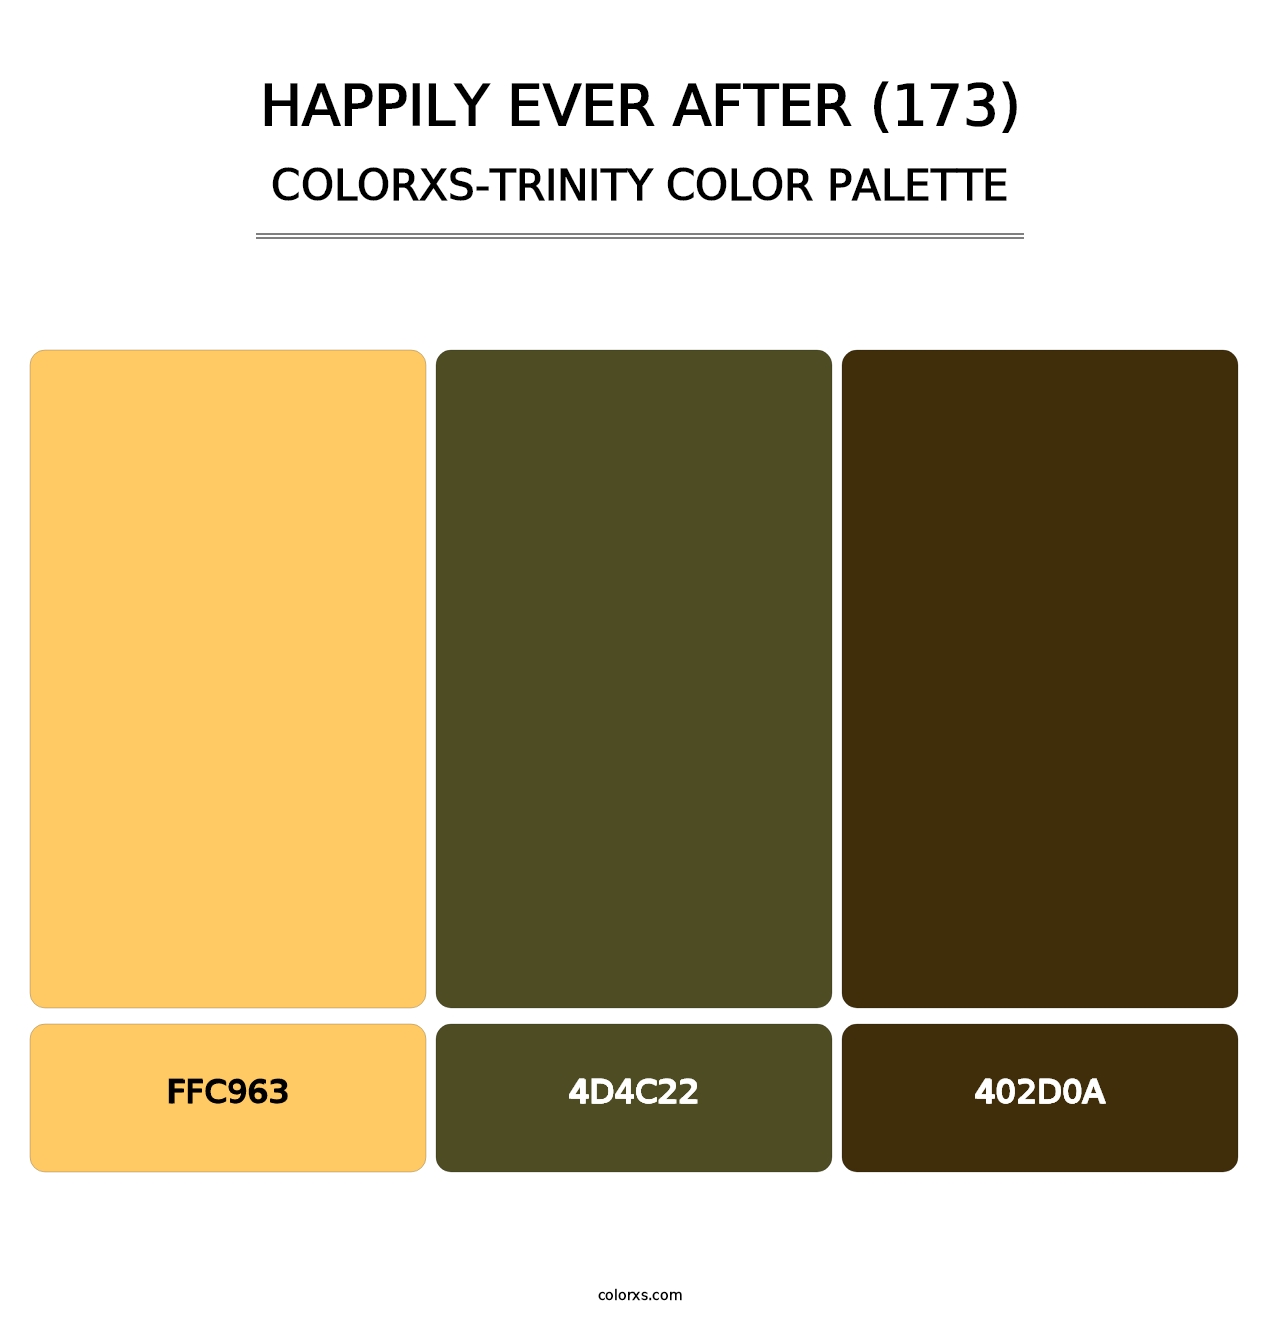 Happily Ever After (173) - Colorxs Trinity Palette